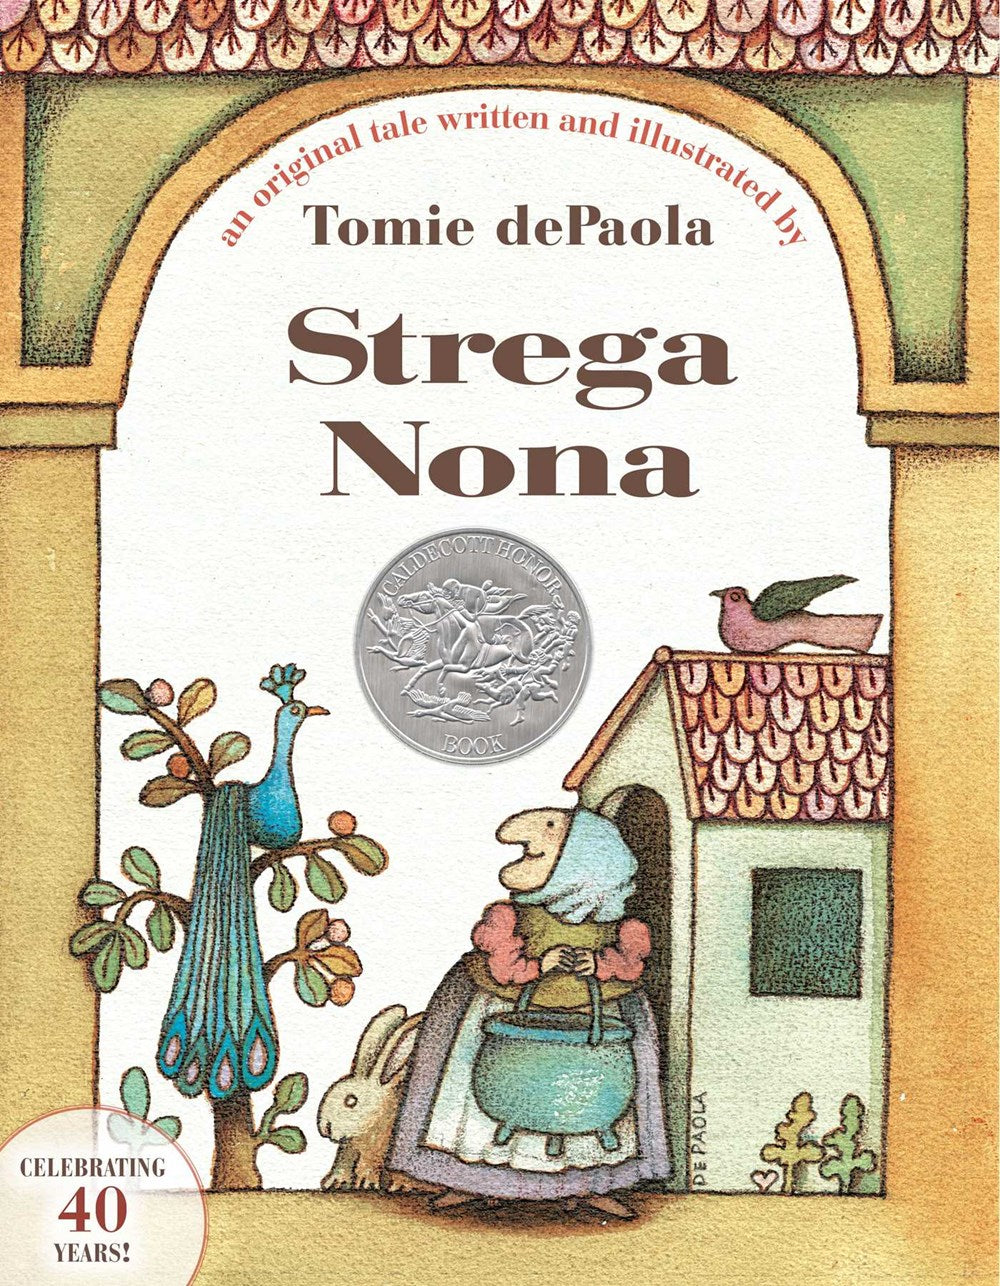 Strega Nona: An Original Tale by Tomie dePaola (40th Anniversary Edition)